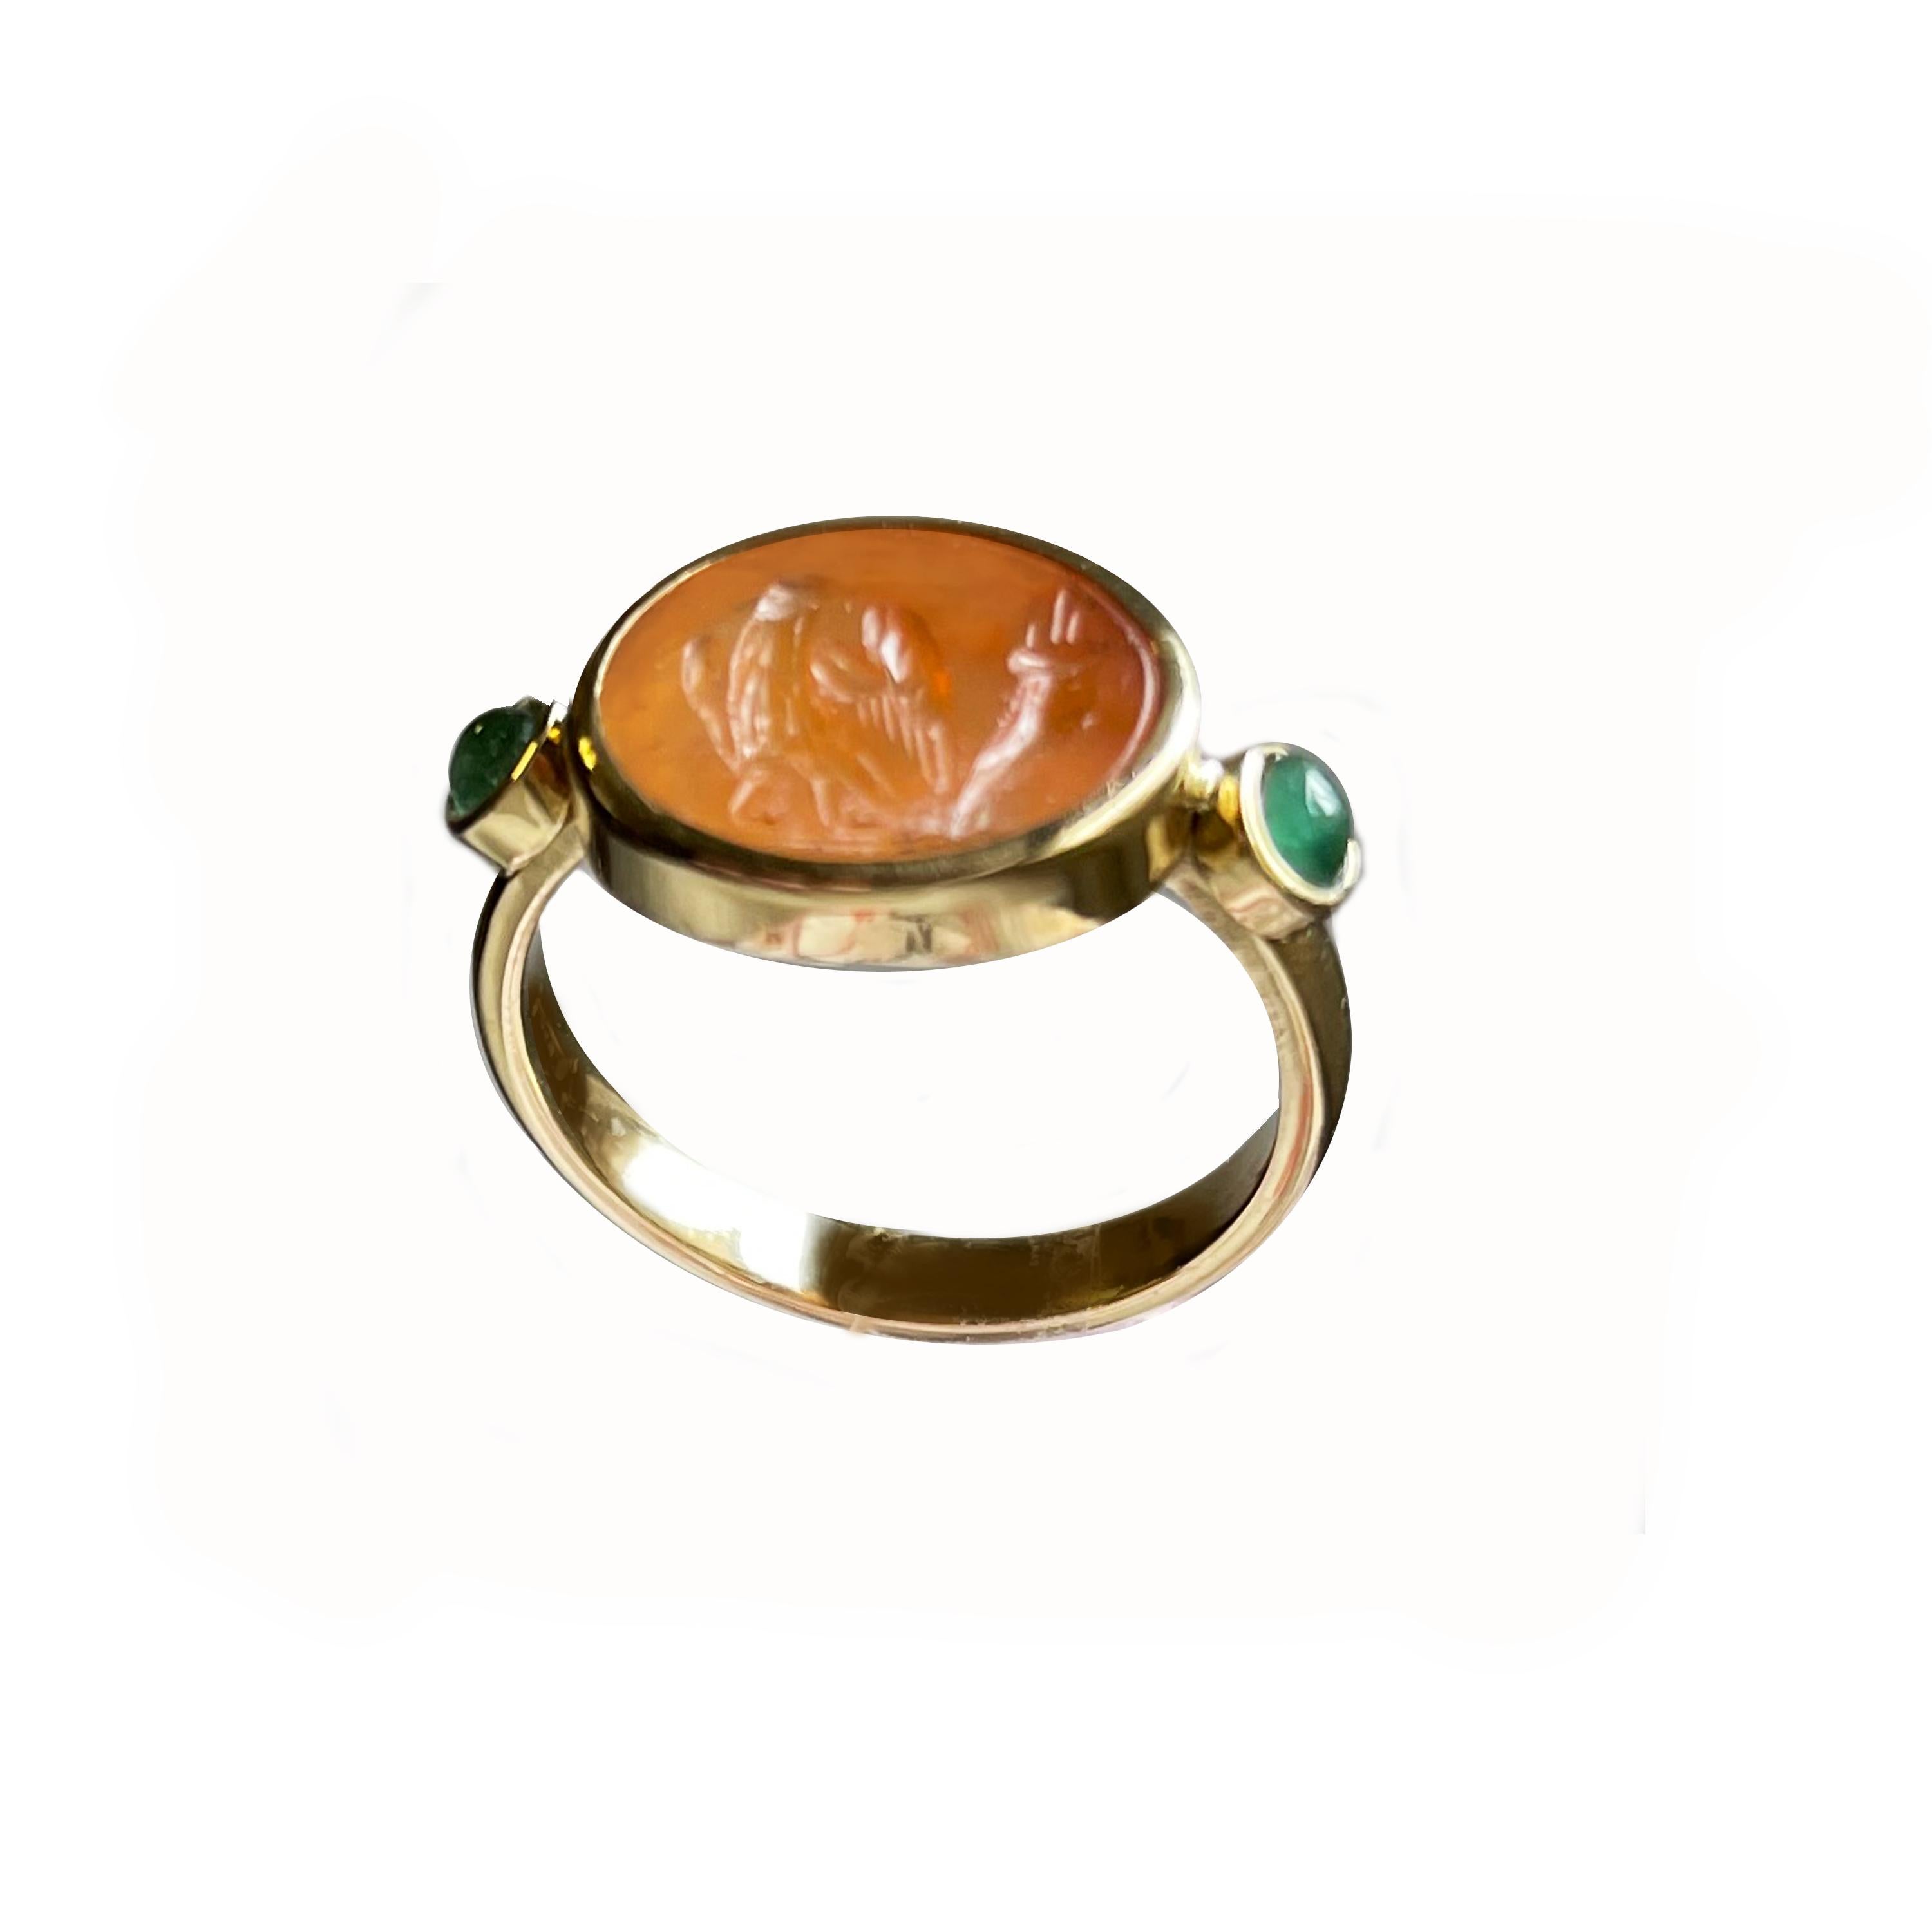 In this 18 kt gold and emerald ring there is an authentic Roman intaglio (2nd century AD) on carnelian, which depicts an eagle and a cornucopia (horn of plenty), allegorical and votive depiction. ( Finger size 7.5 )
The eagles are of great